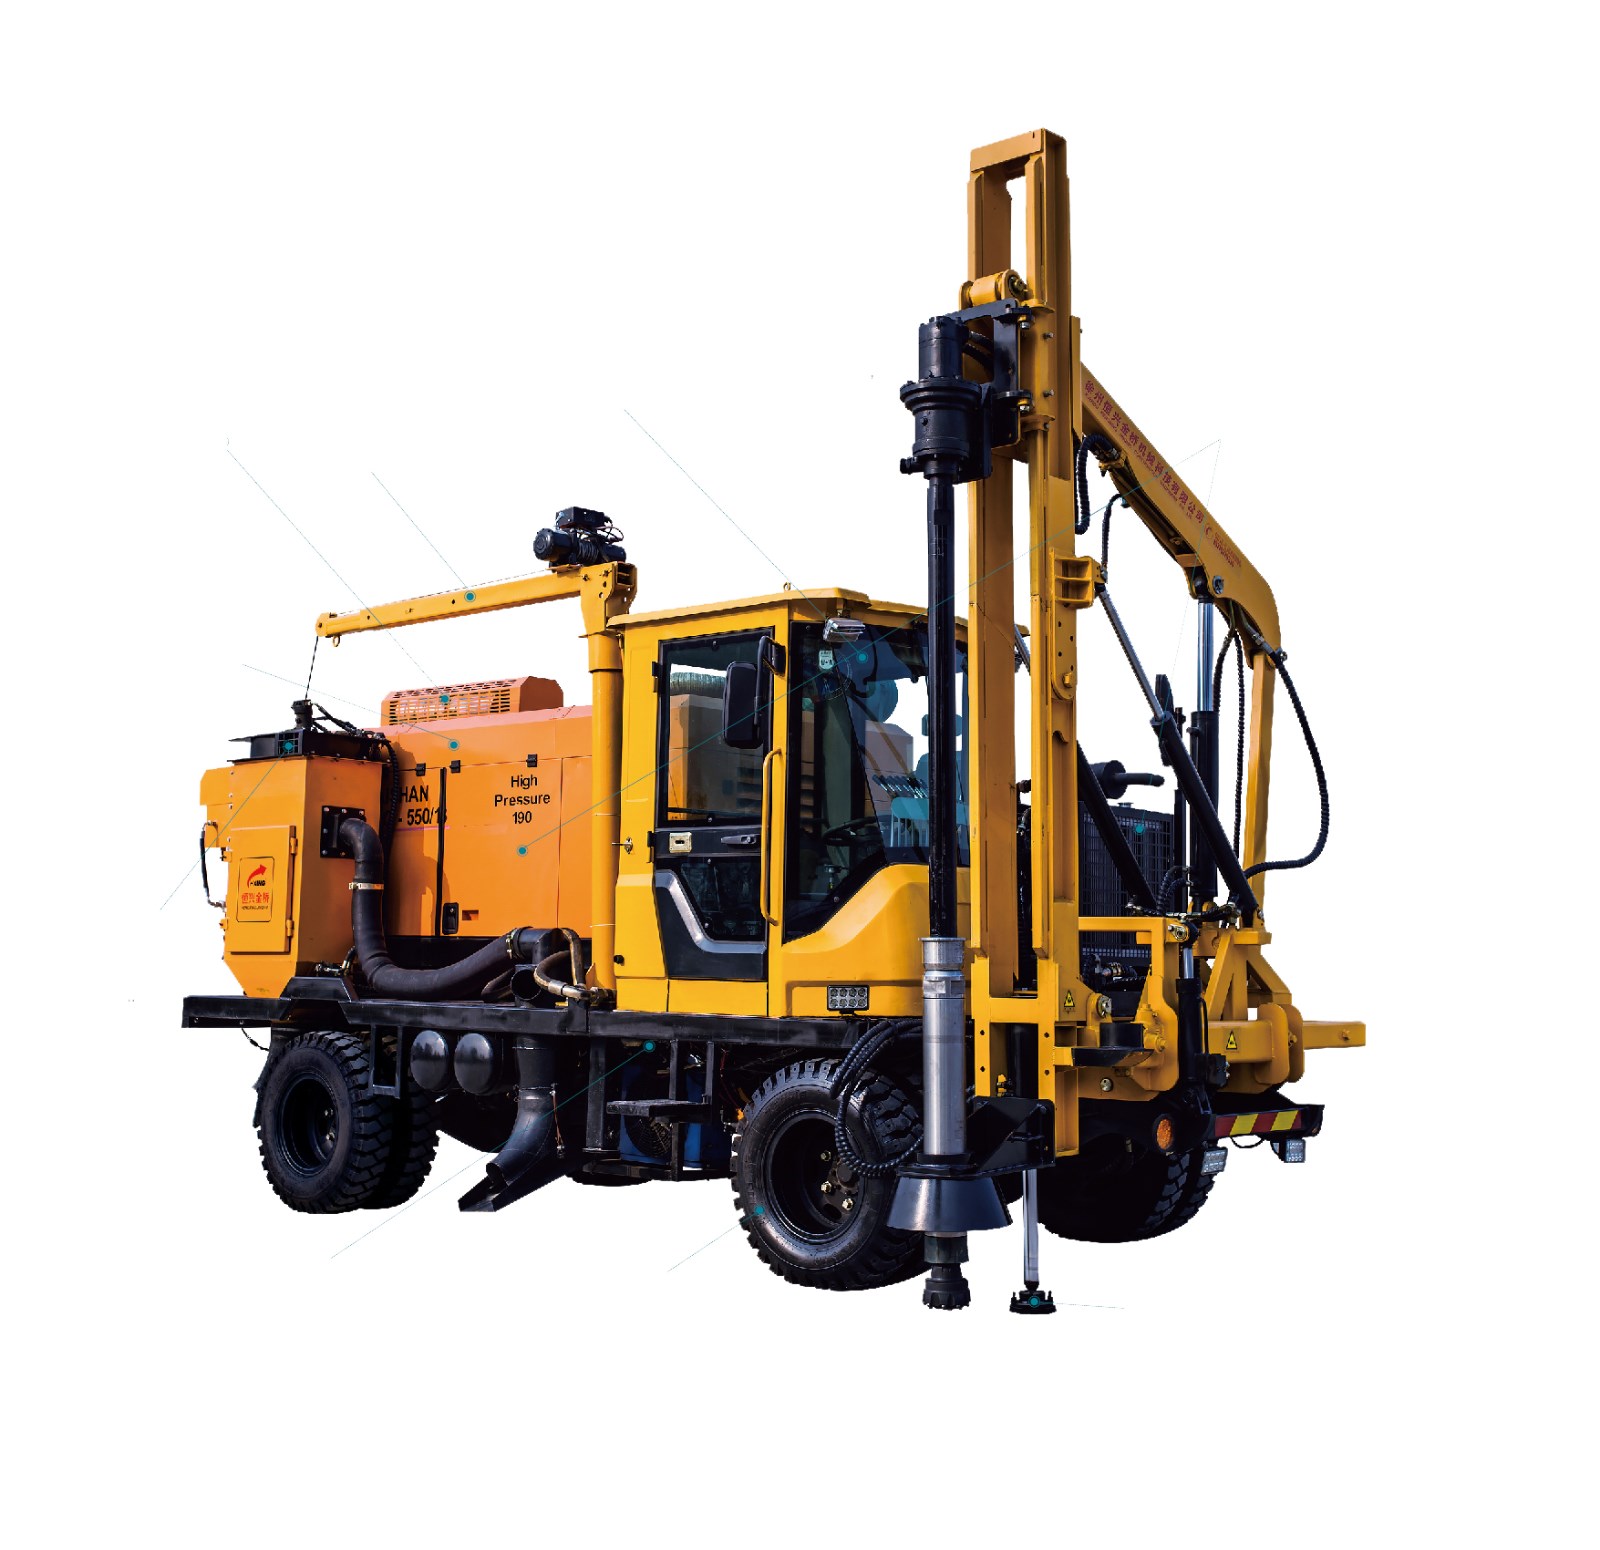 Highway Guardrail Wheel pile driver equipped with air compressor